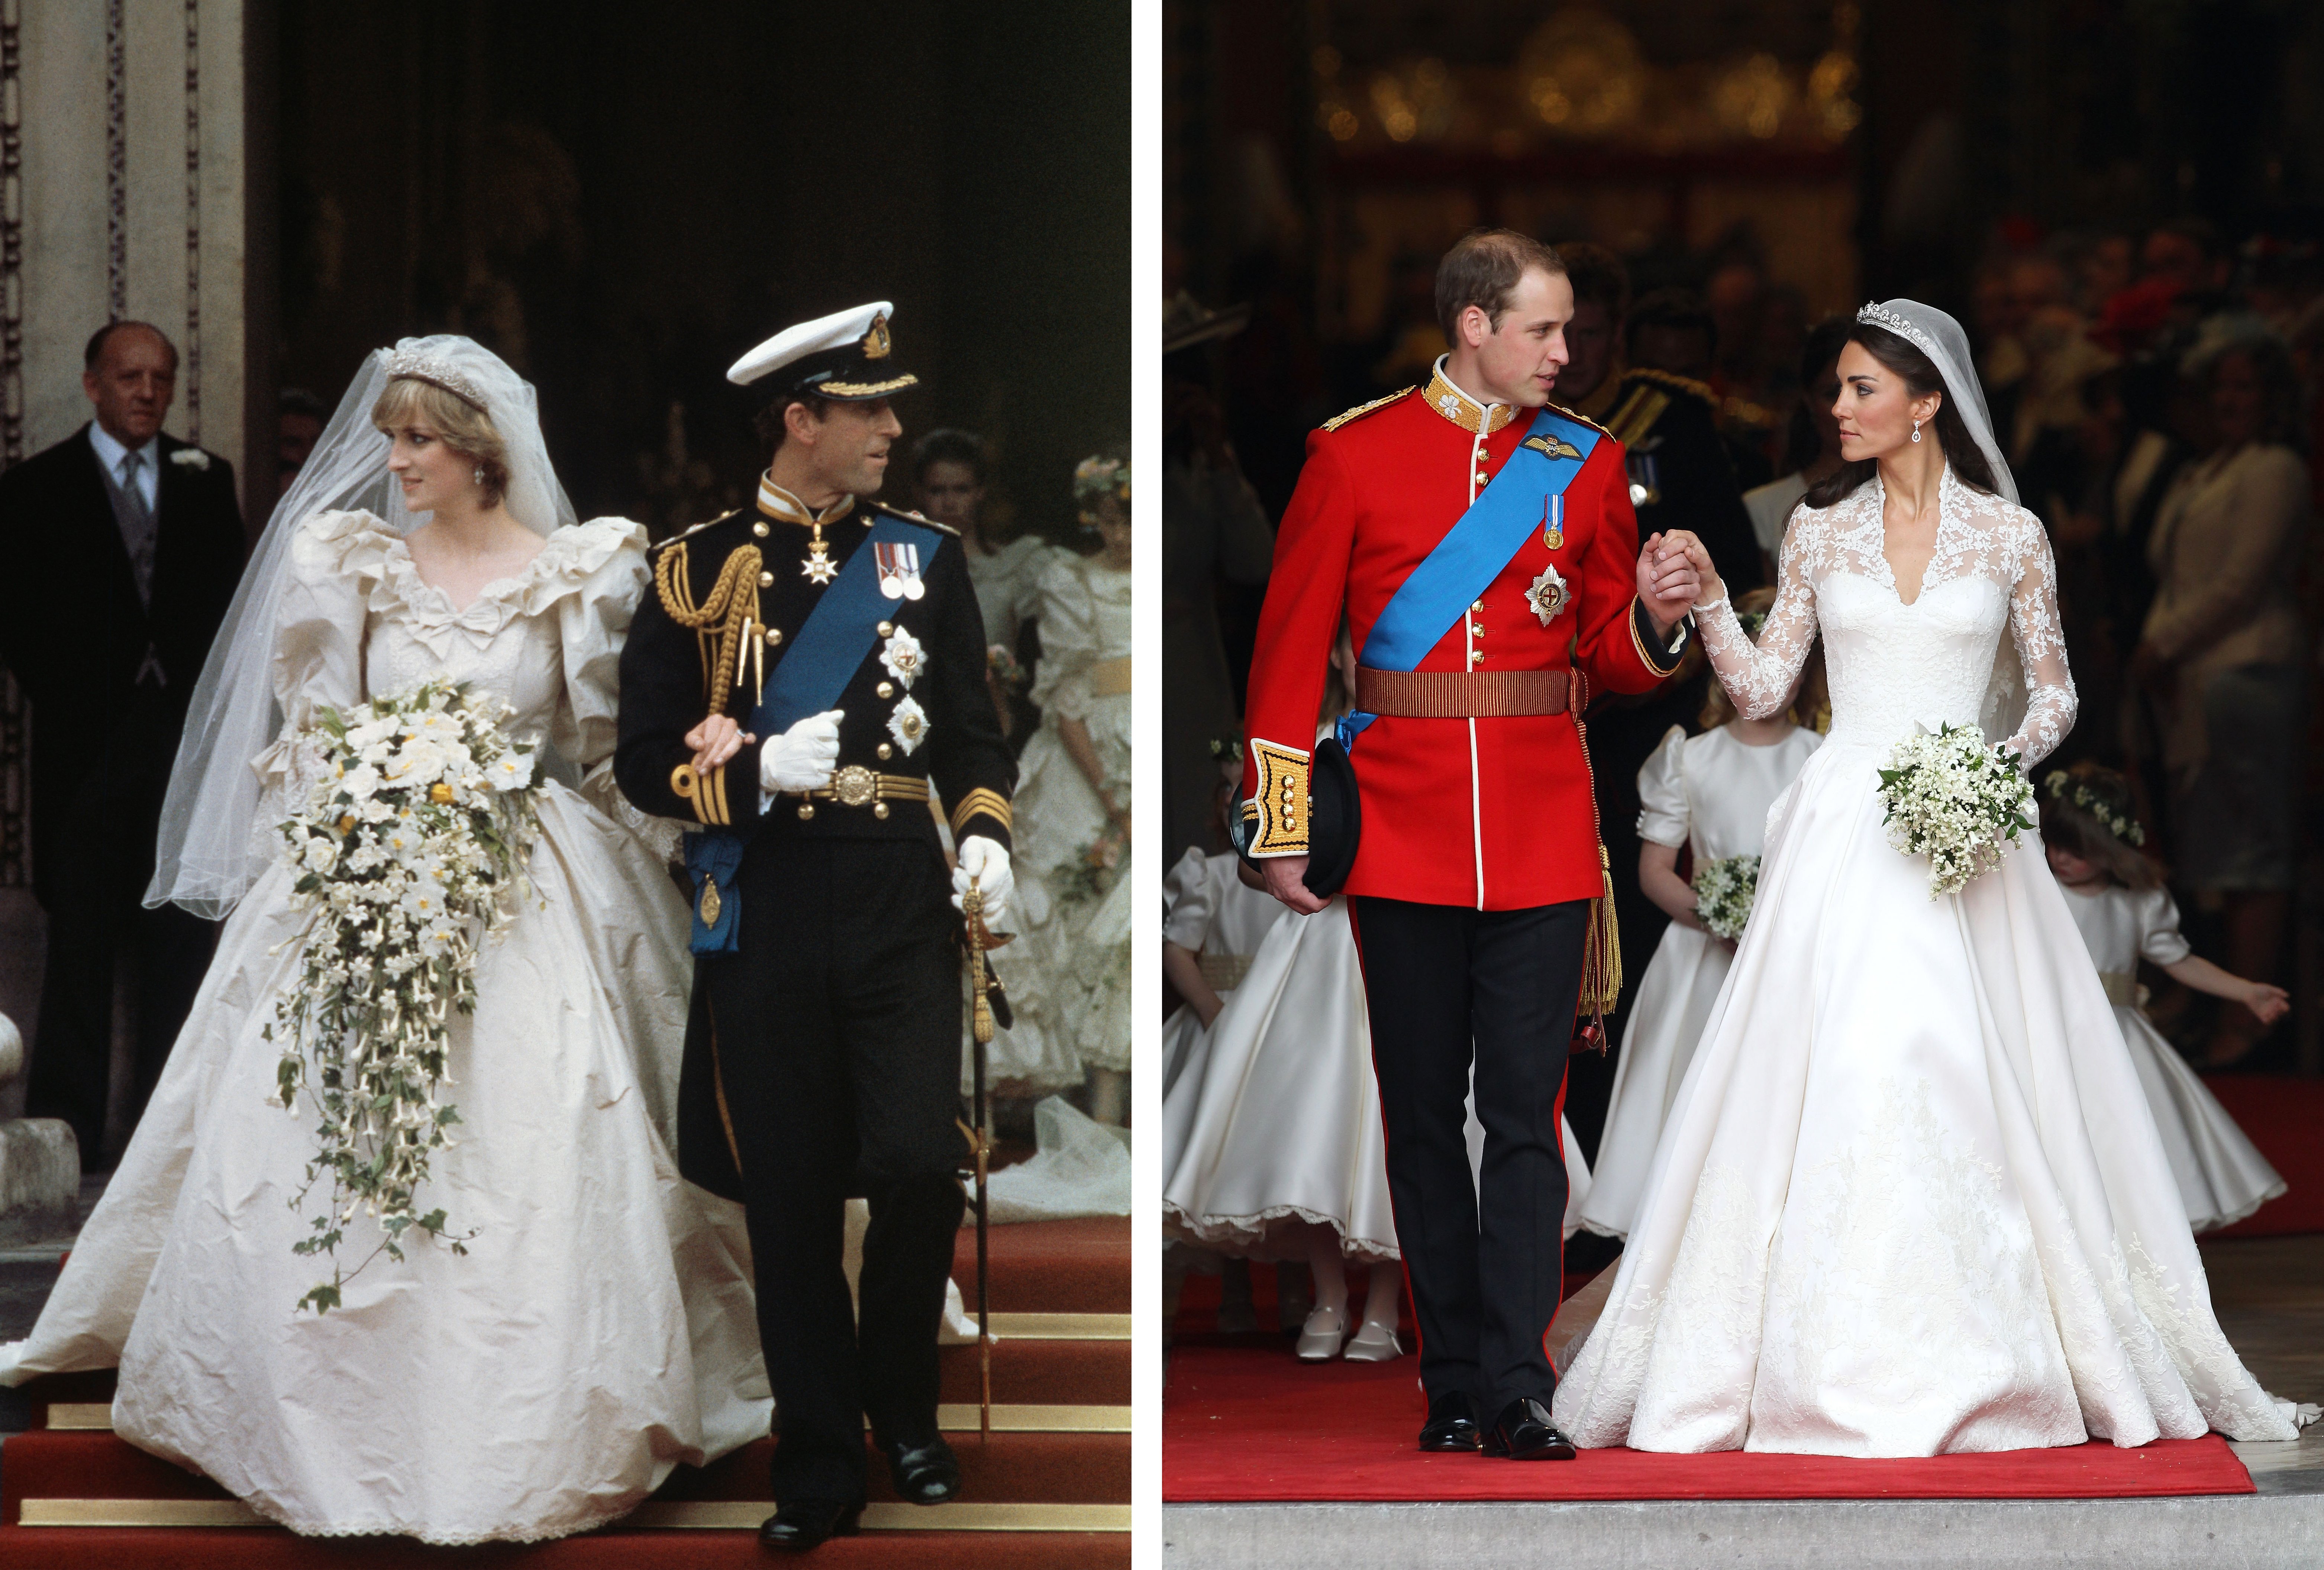 The wedding of King Charles and Lady Diana Spencer at St Paul's Cathedral in London, 29th July 1981 [Left]. Prince William and Kate Middleton's wedding at Westminster Abbey on April 29, 2011 in London, England [Right] | Source: Getty Images